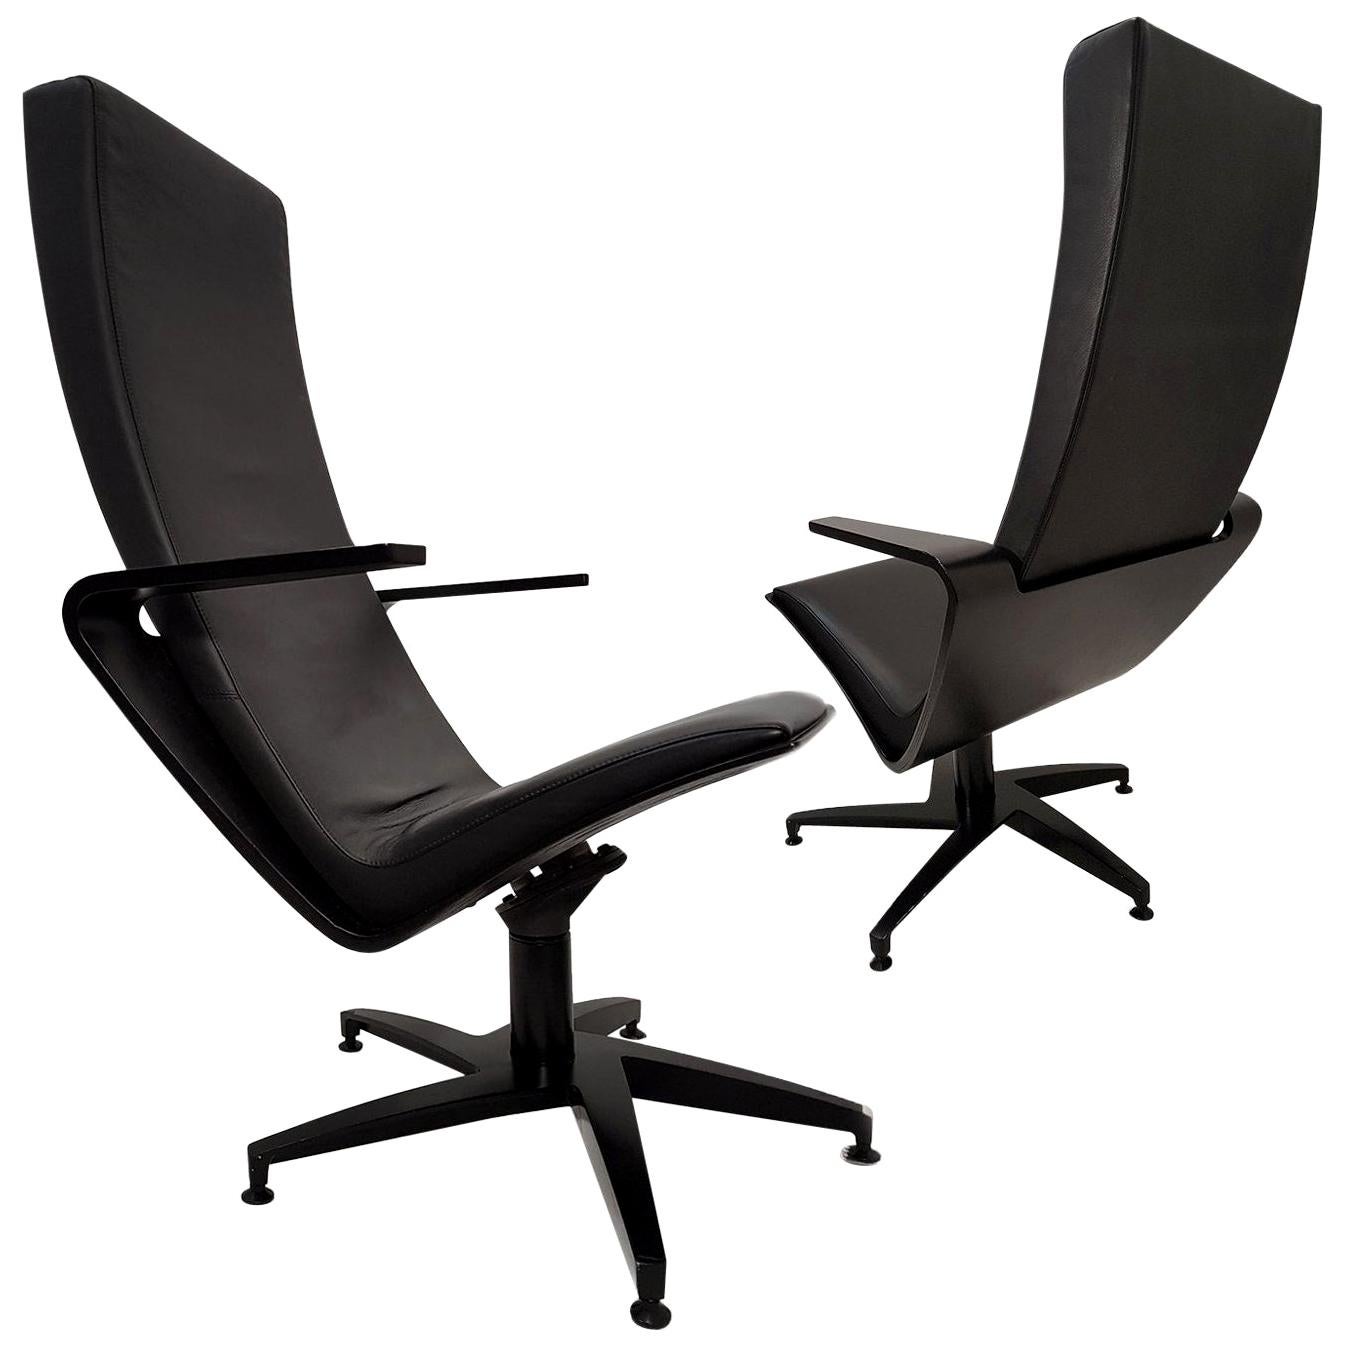 A pair of sculptural, swiveling lounge chairs. Base of black cast aluminium, seat shell of birch plywood stained in black. Damper mechanism under the seat. Upholstered with high-end quality black leather. Very comfortable seat. 

Design Pentti